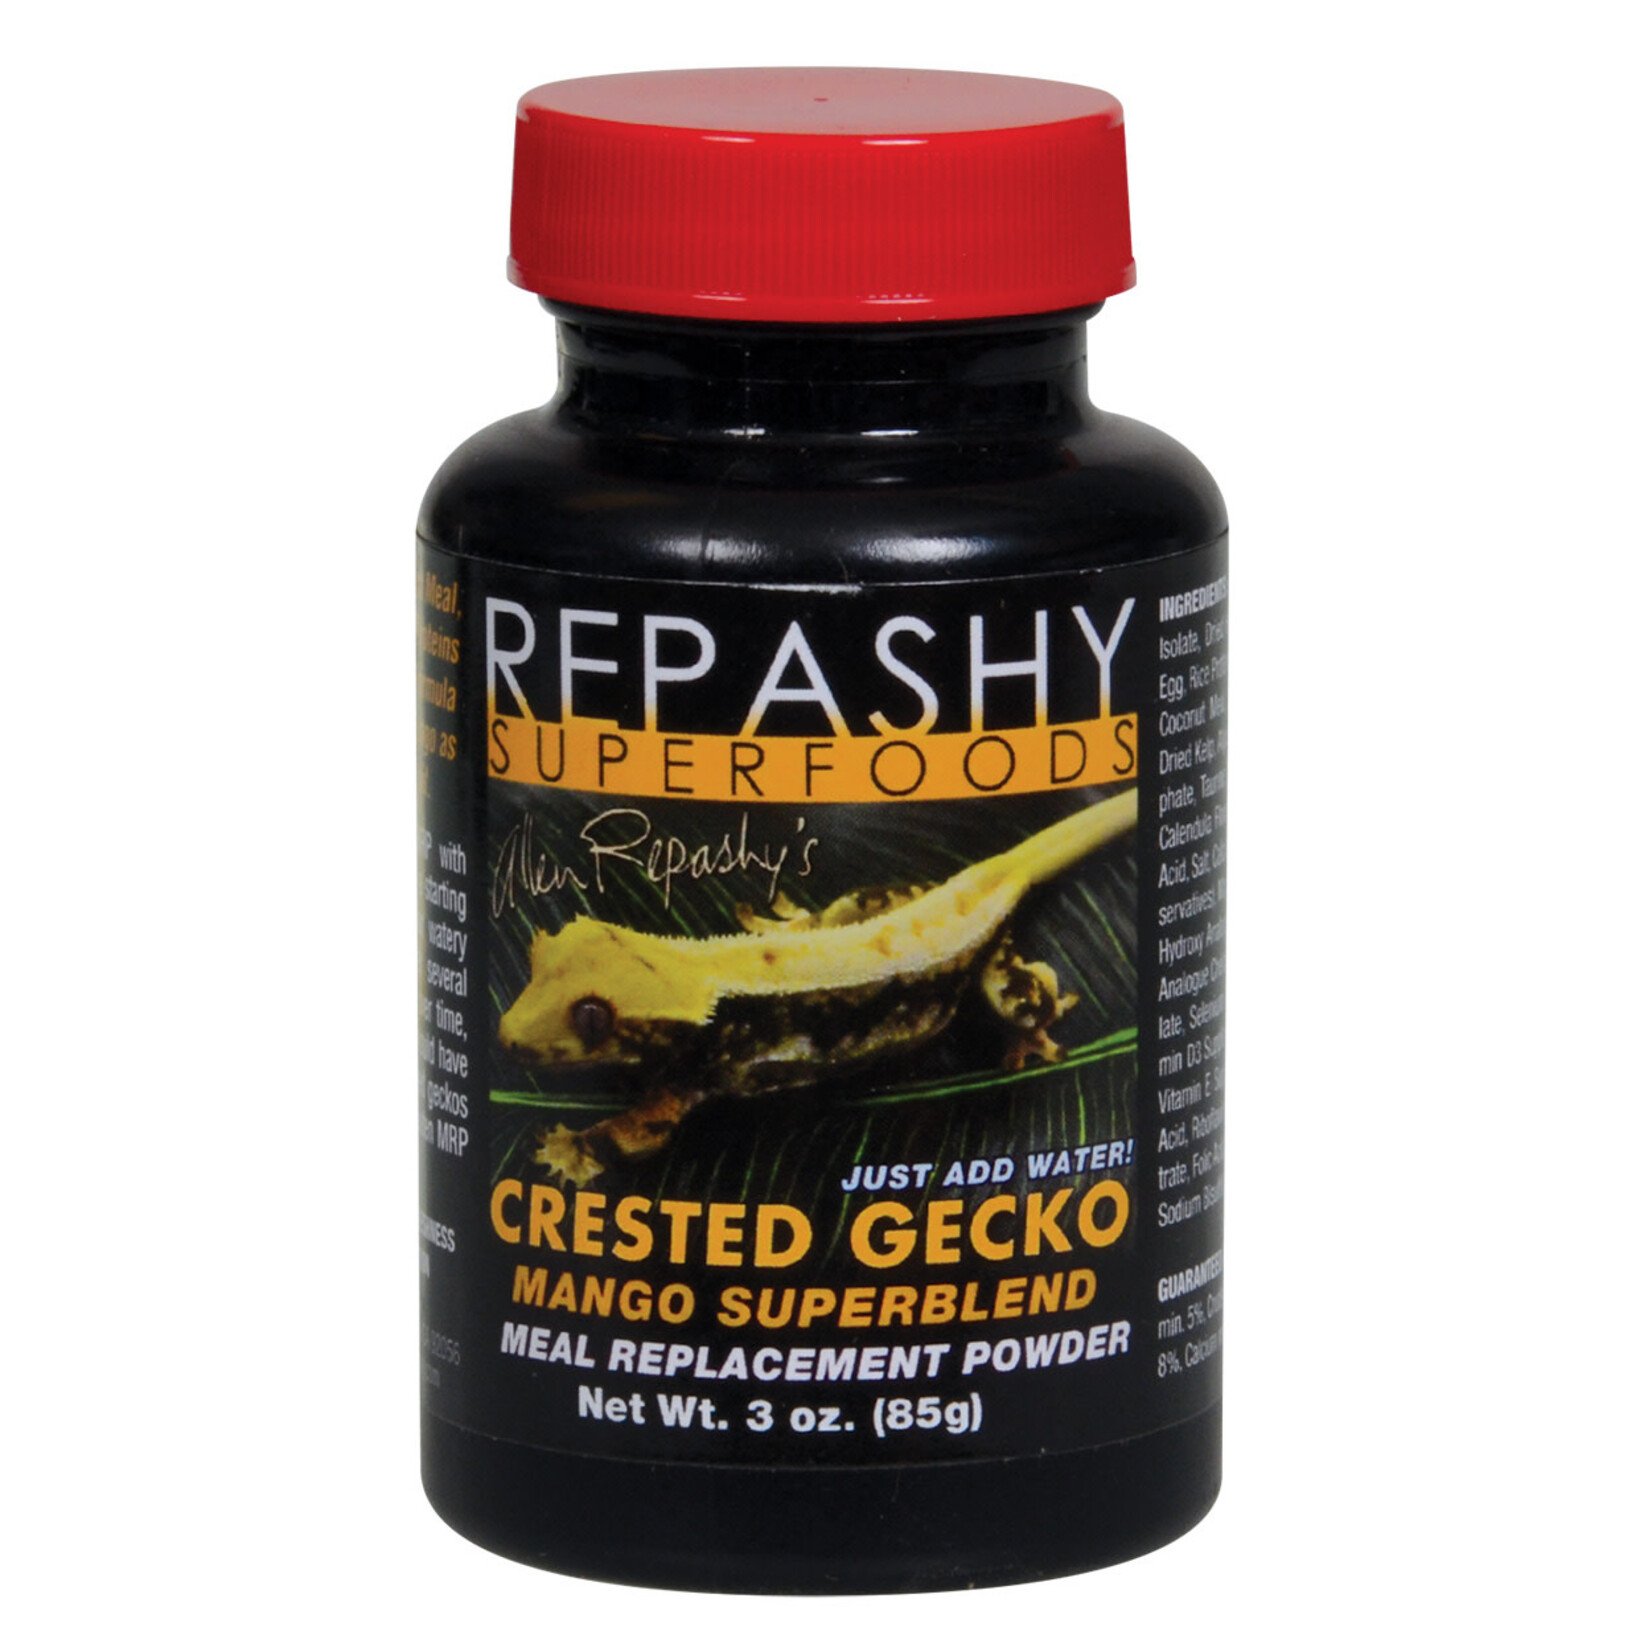 REPASHY Repashy Superfoods Crested Gecko MRP Mango Superblend Diet - 3 oz